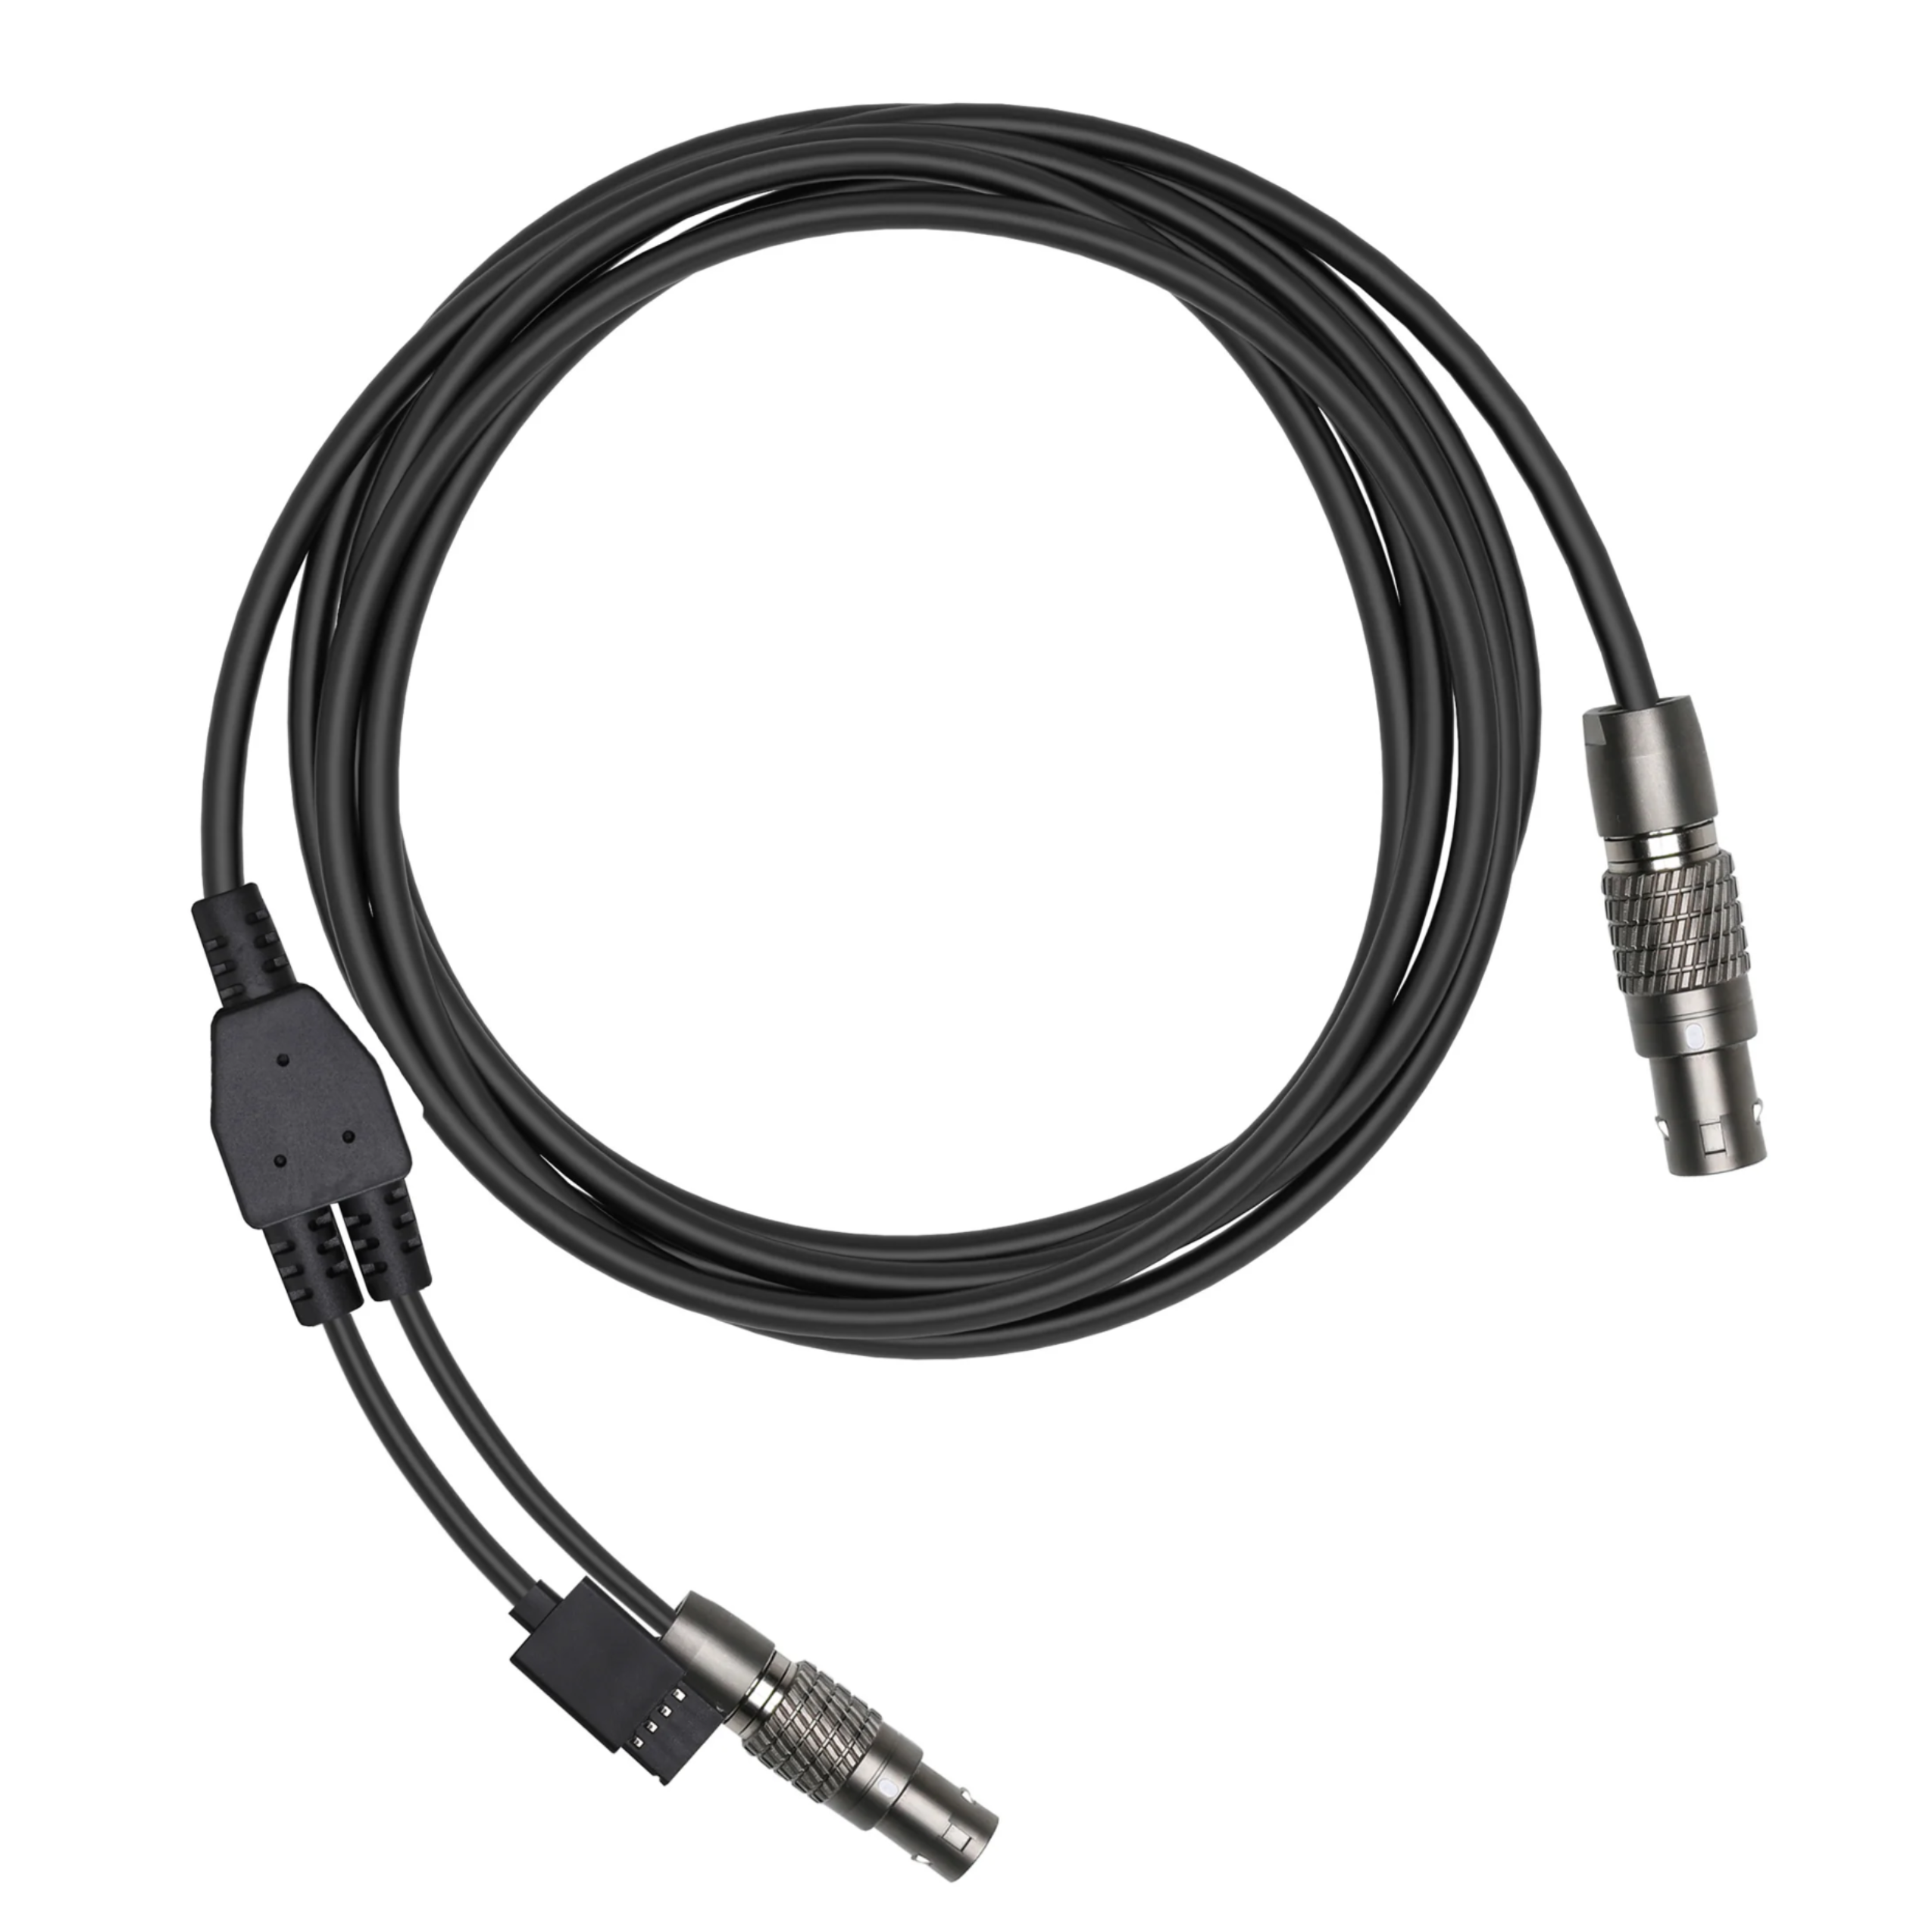 RONIN 2 CAN BUS CABLE - DroneDynamics.ca